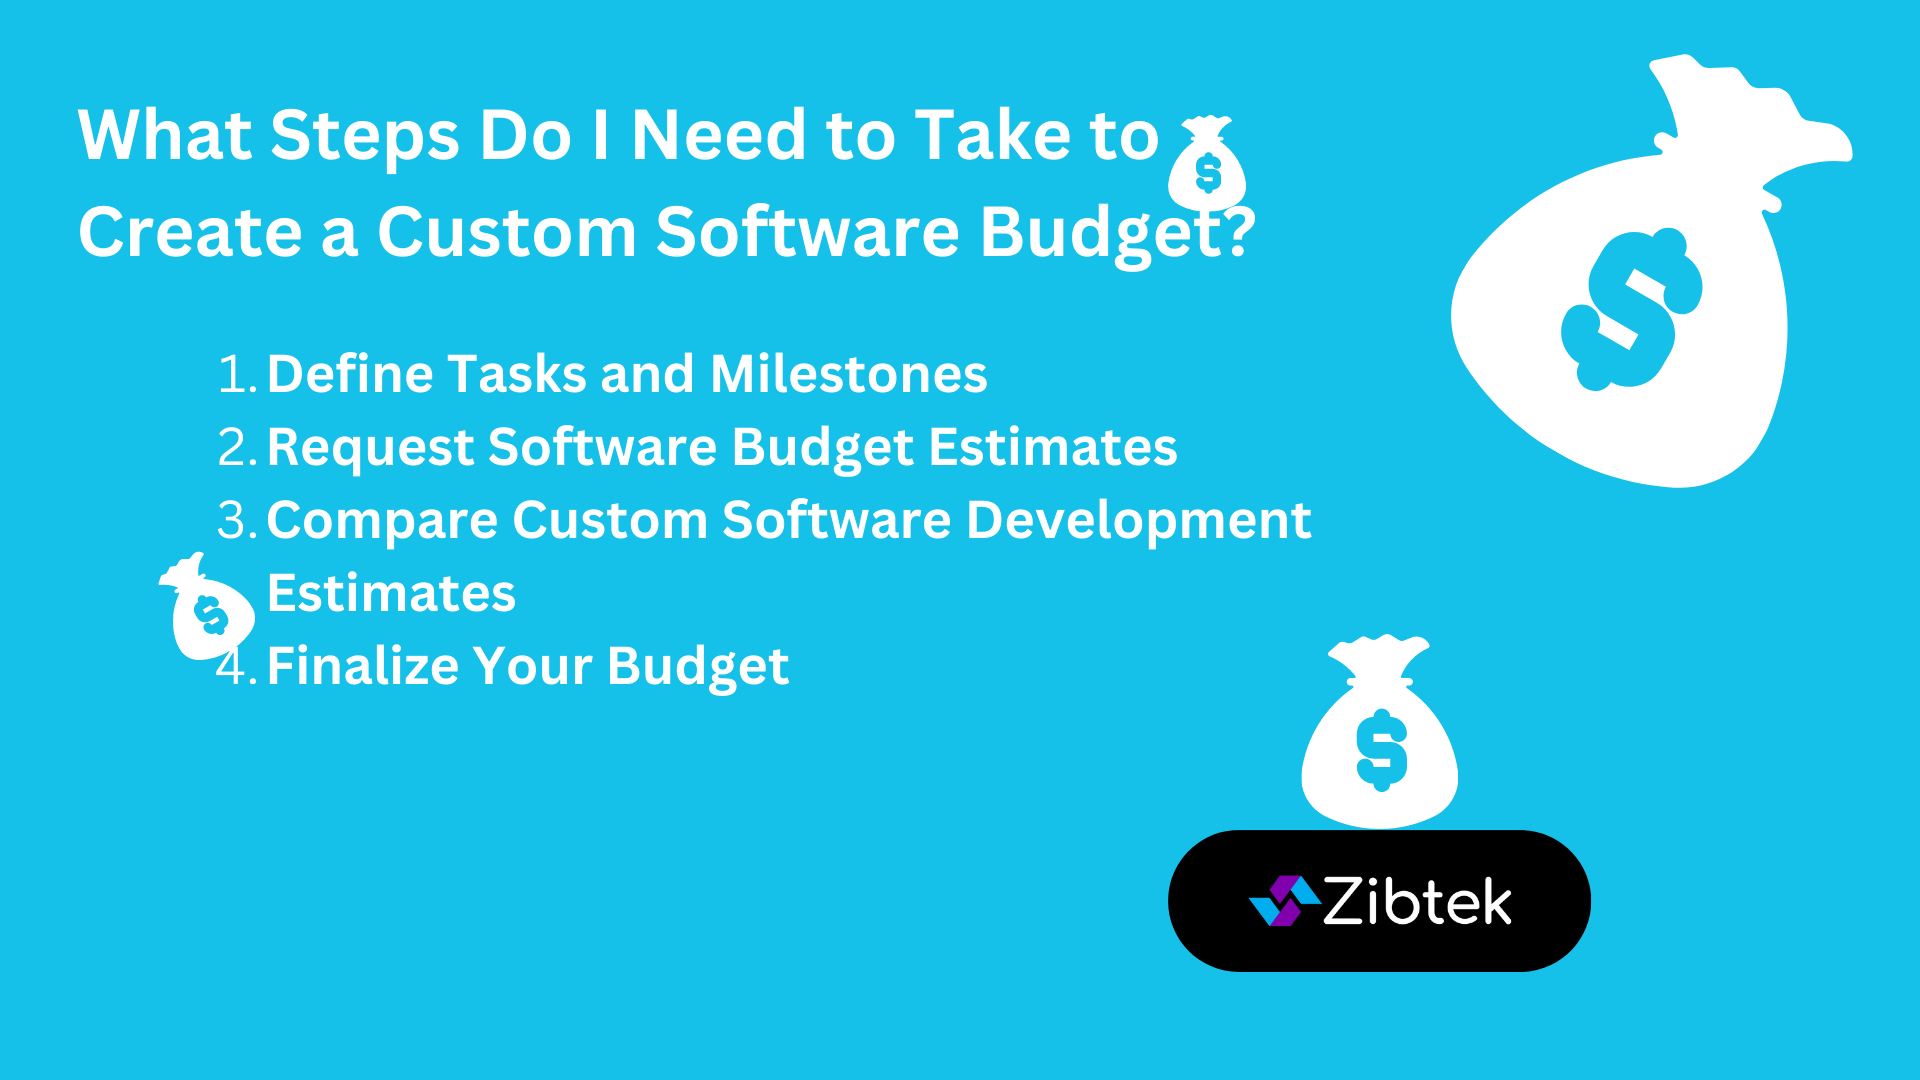 Bullet list of steps to create a custom software budget